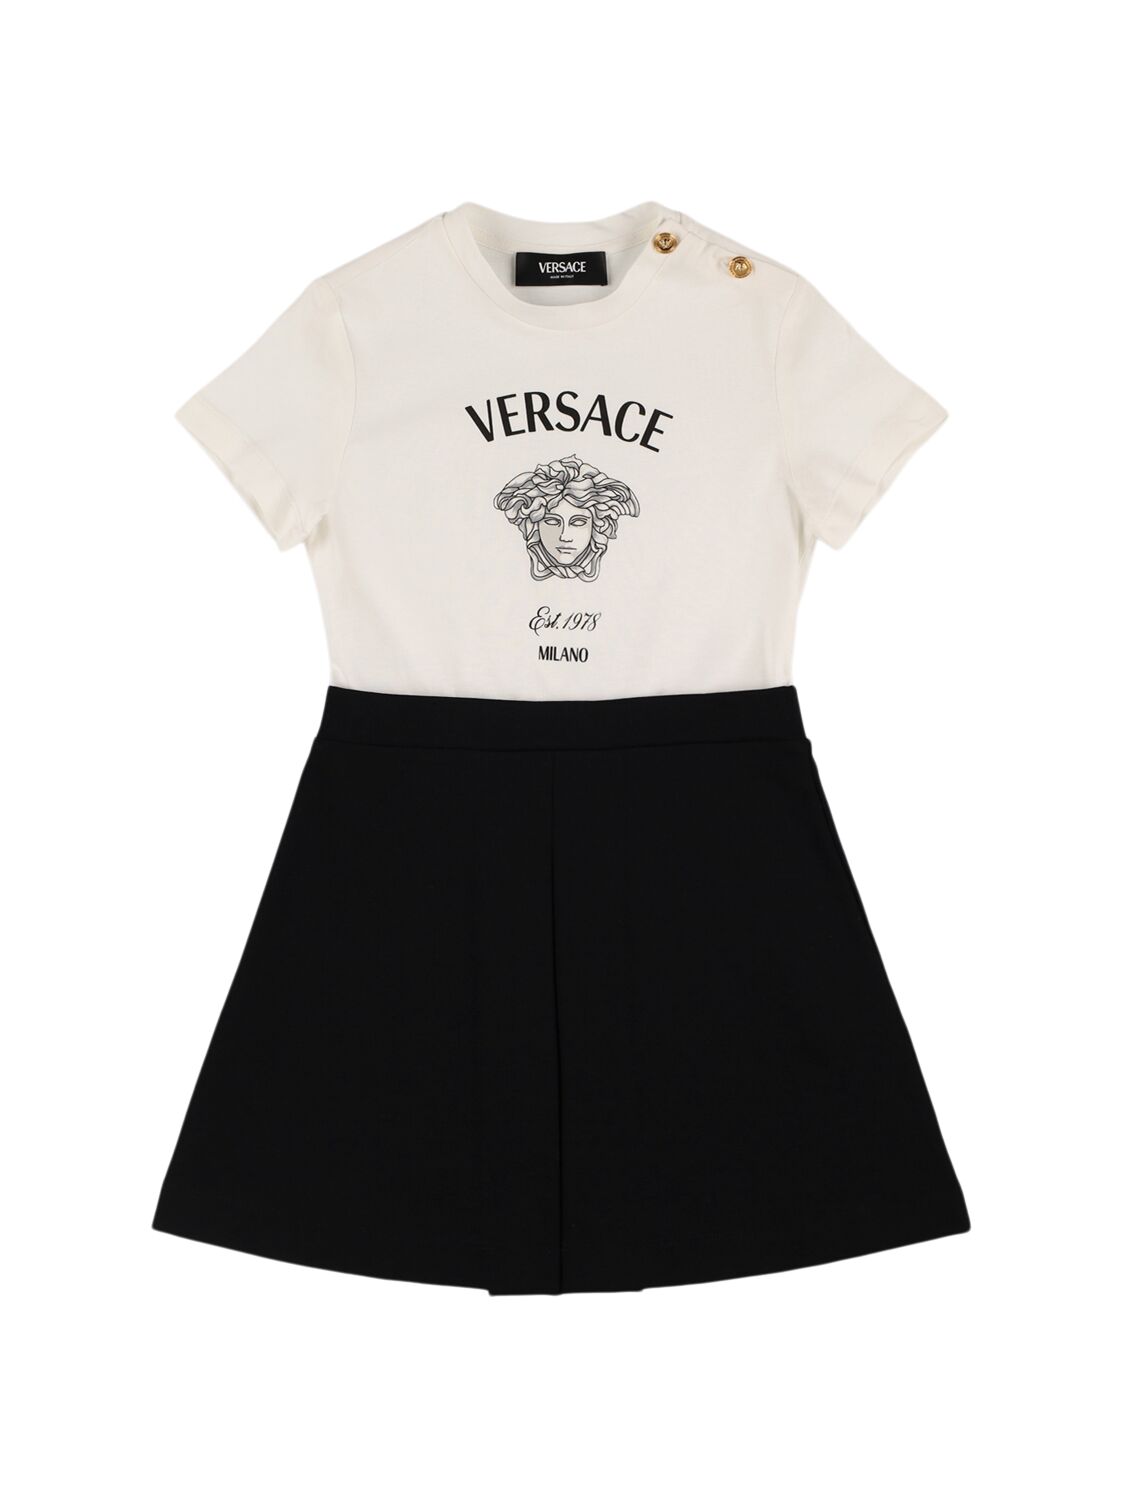 Versace Printed Cotton Jersey Dress In White/black